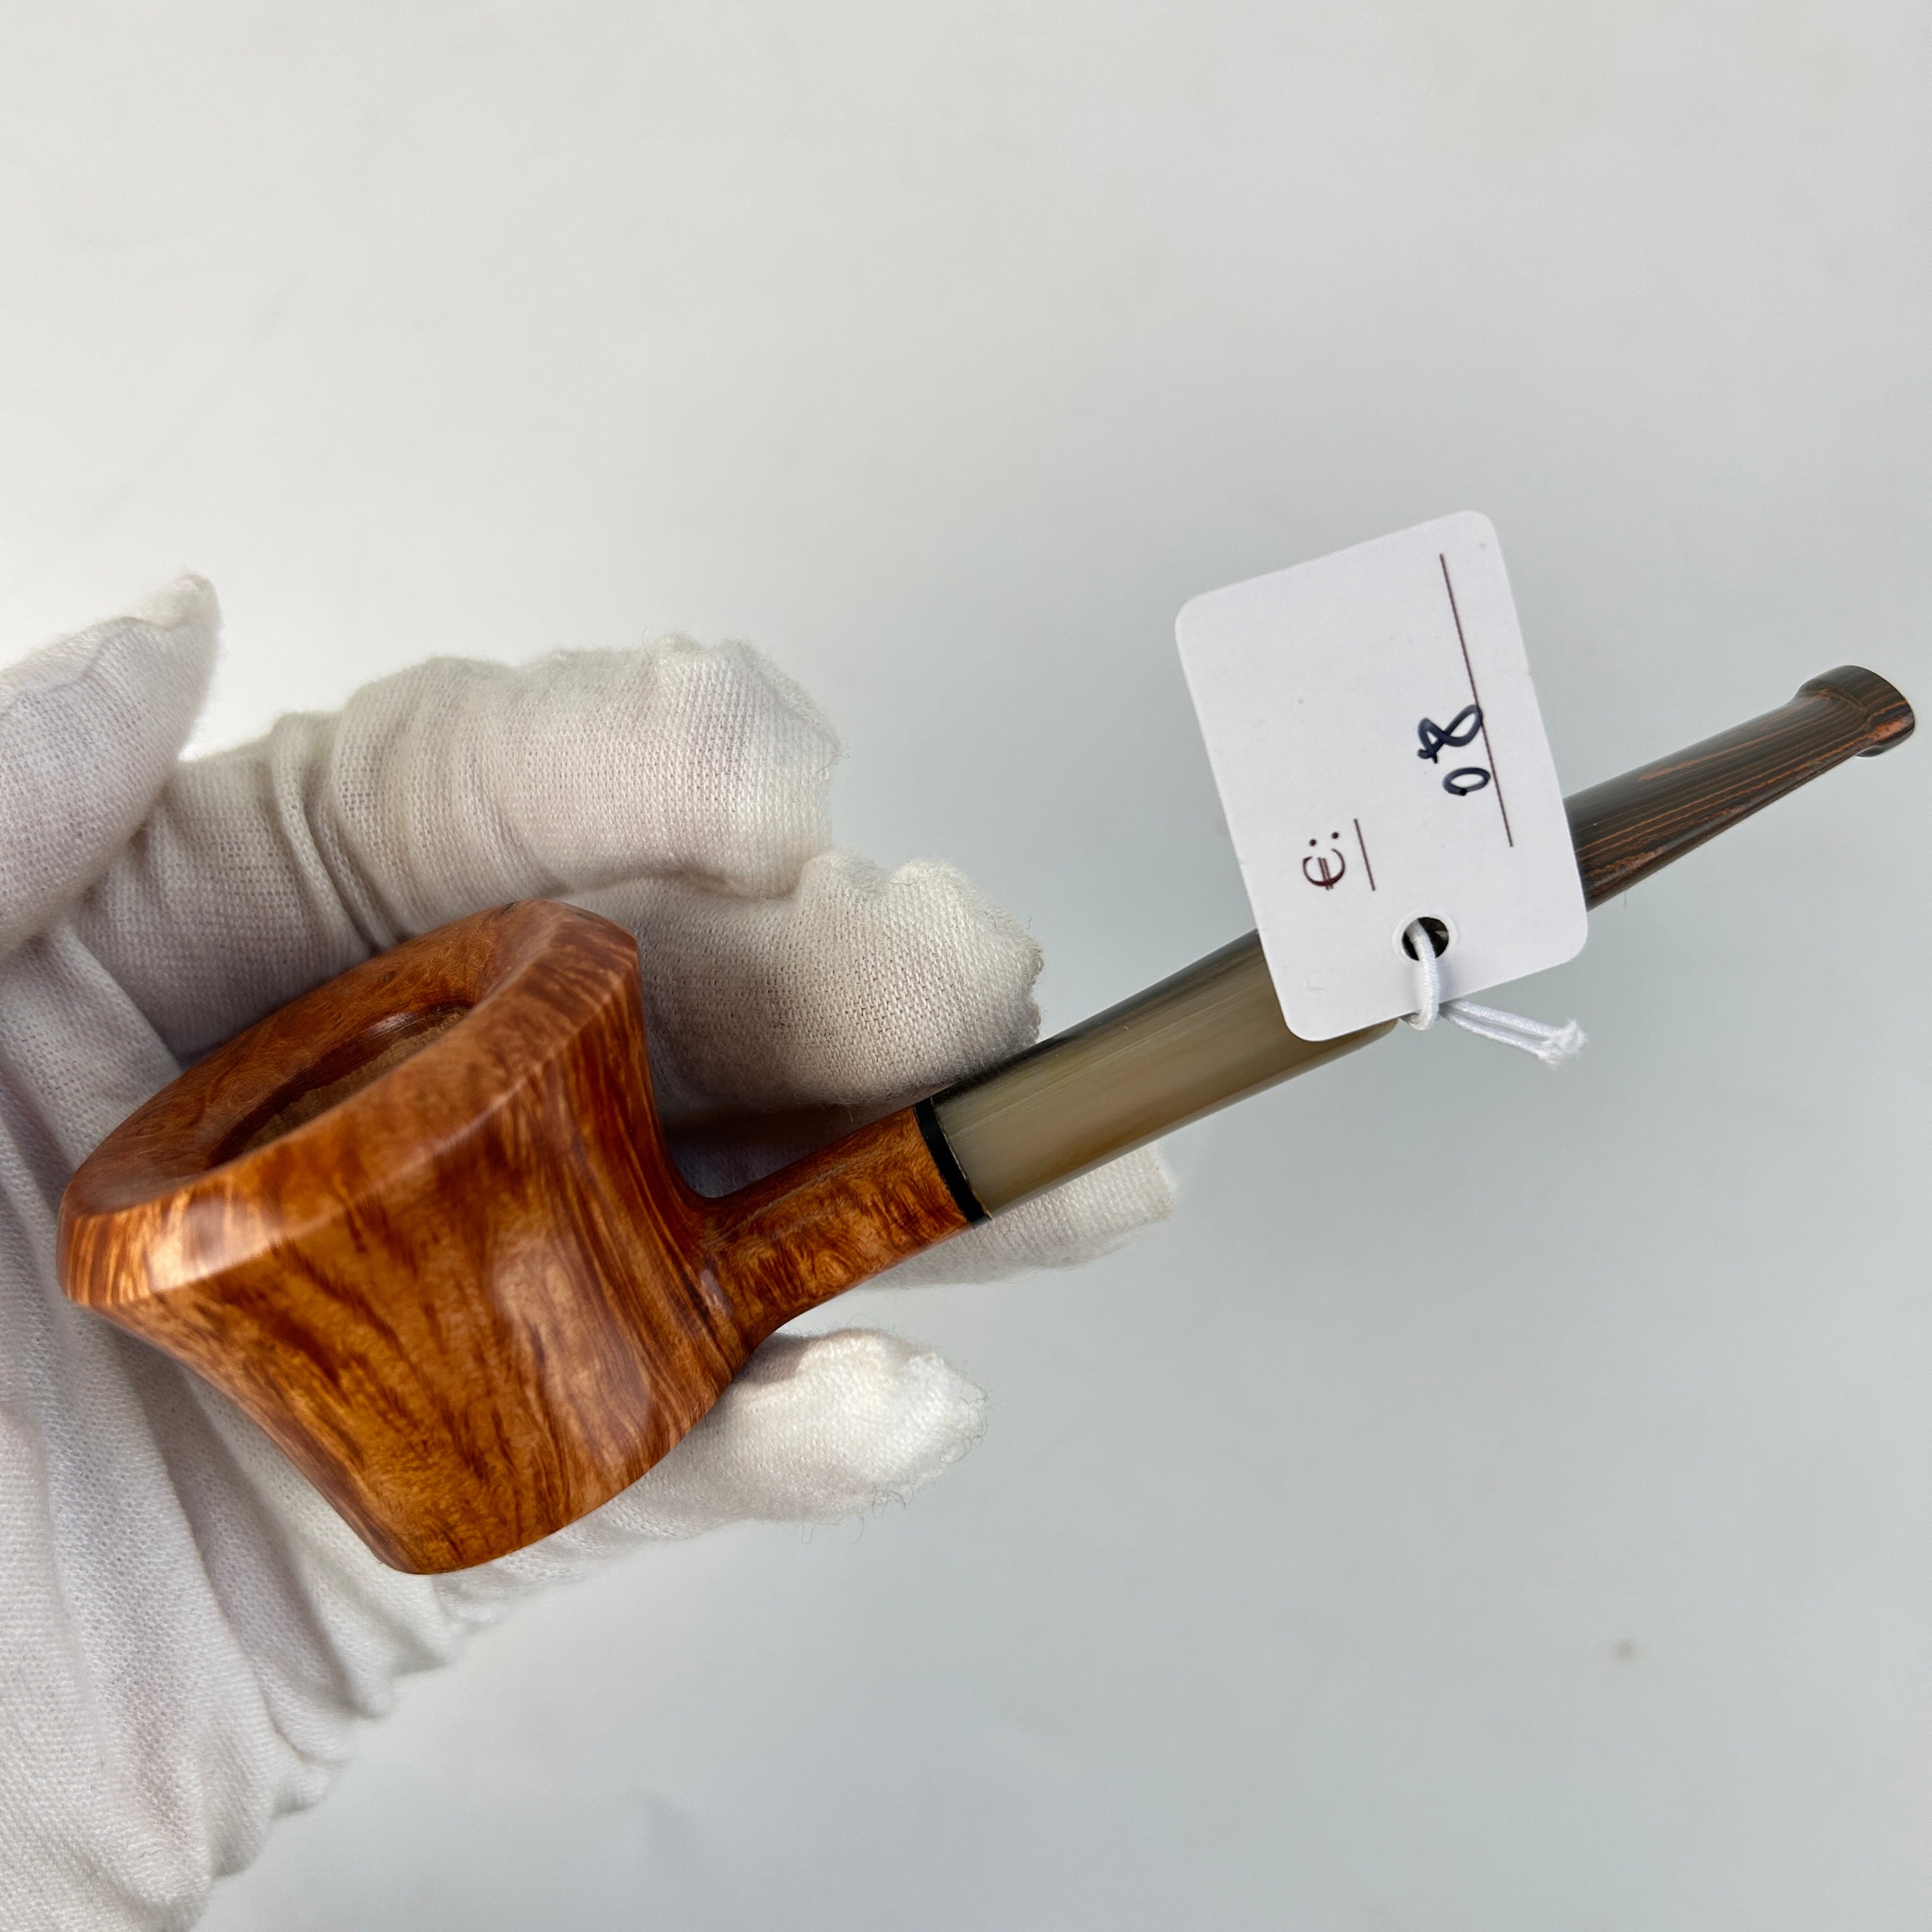 IDEA PIPES Handmade Briar Wood Tobacco Pipes Smooth Finished pot Shape with Ebonite Stem